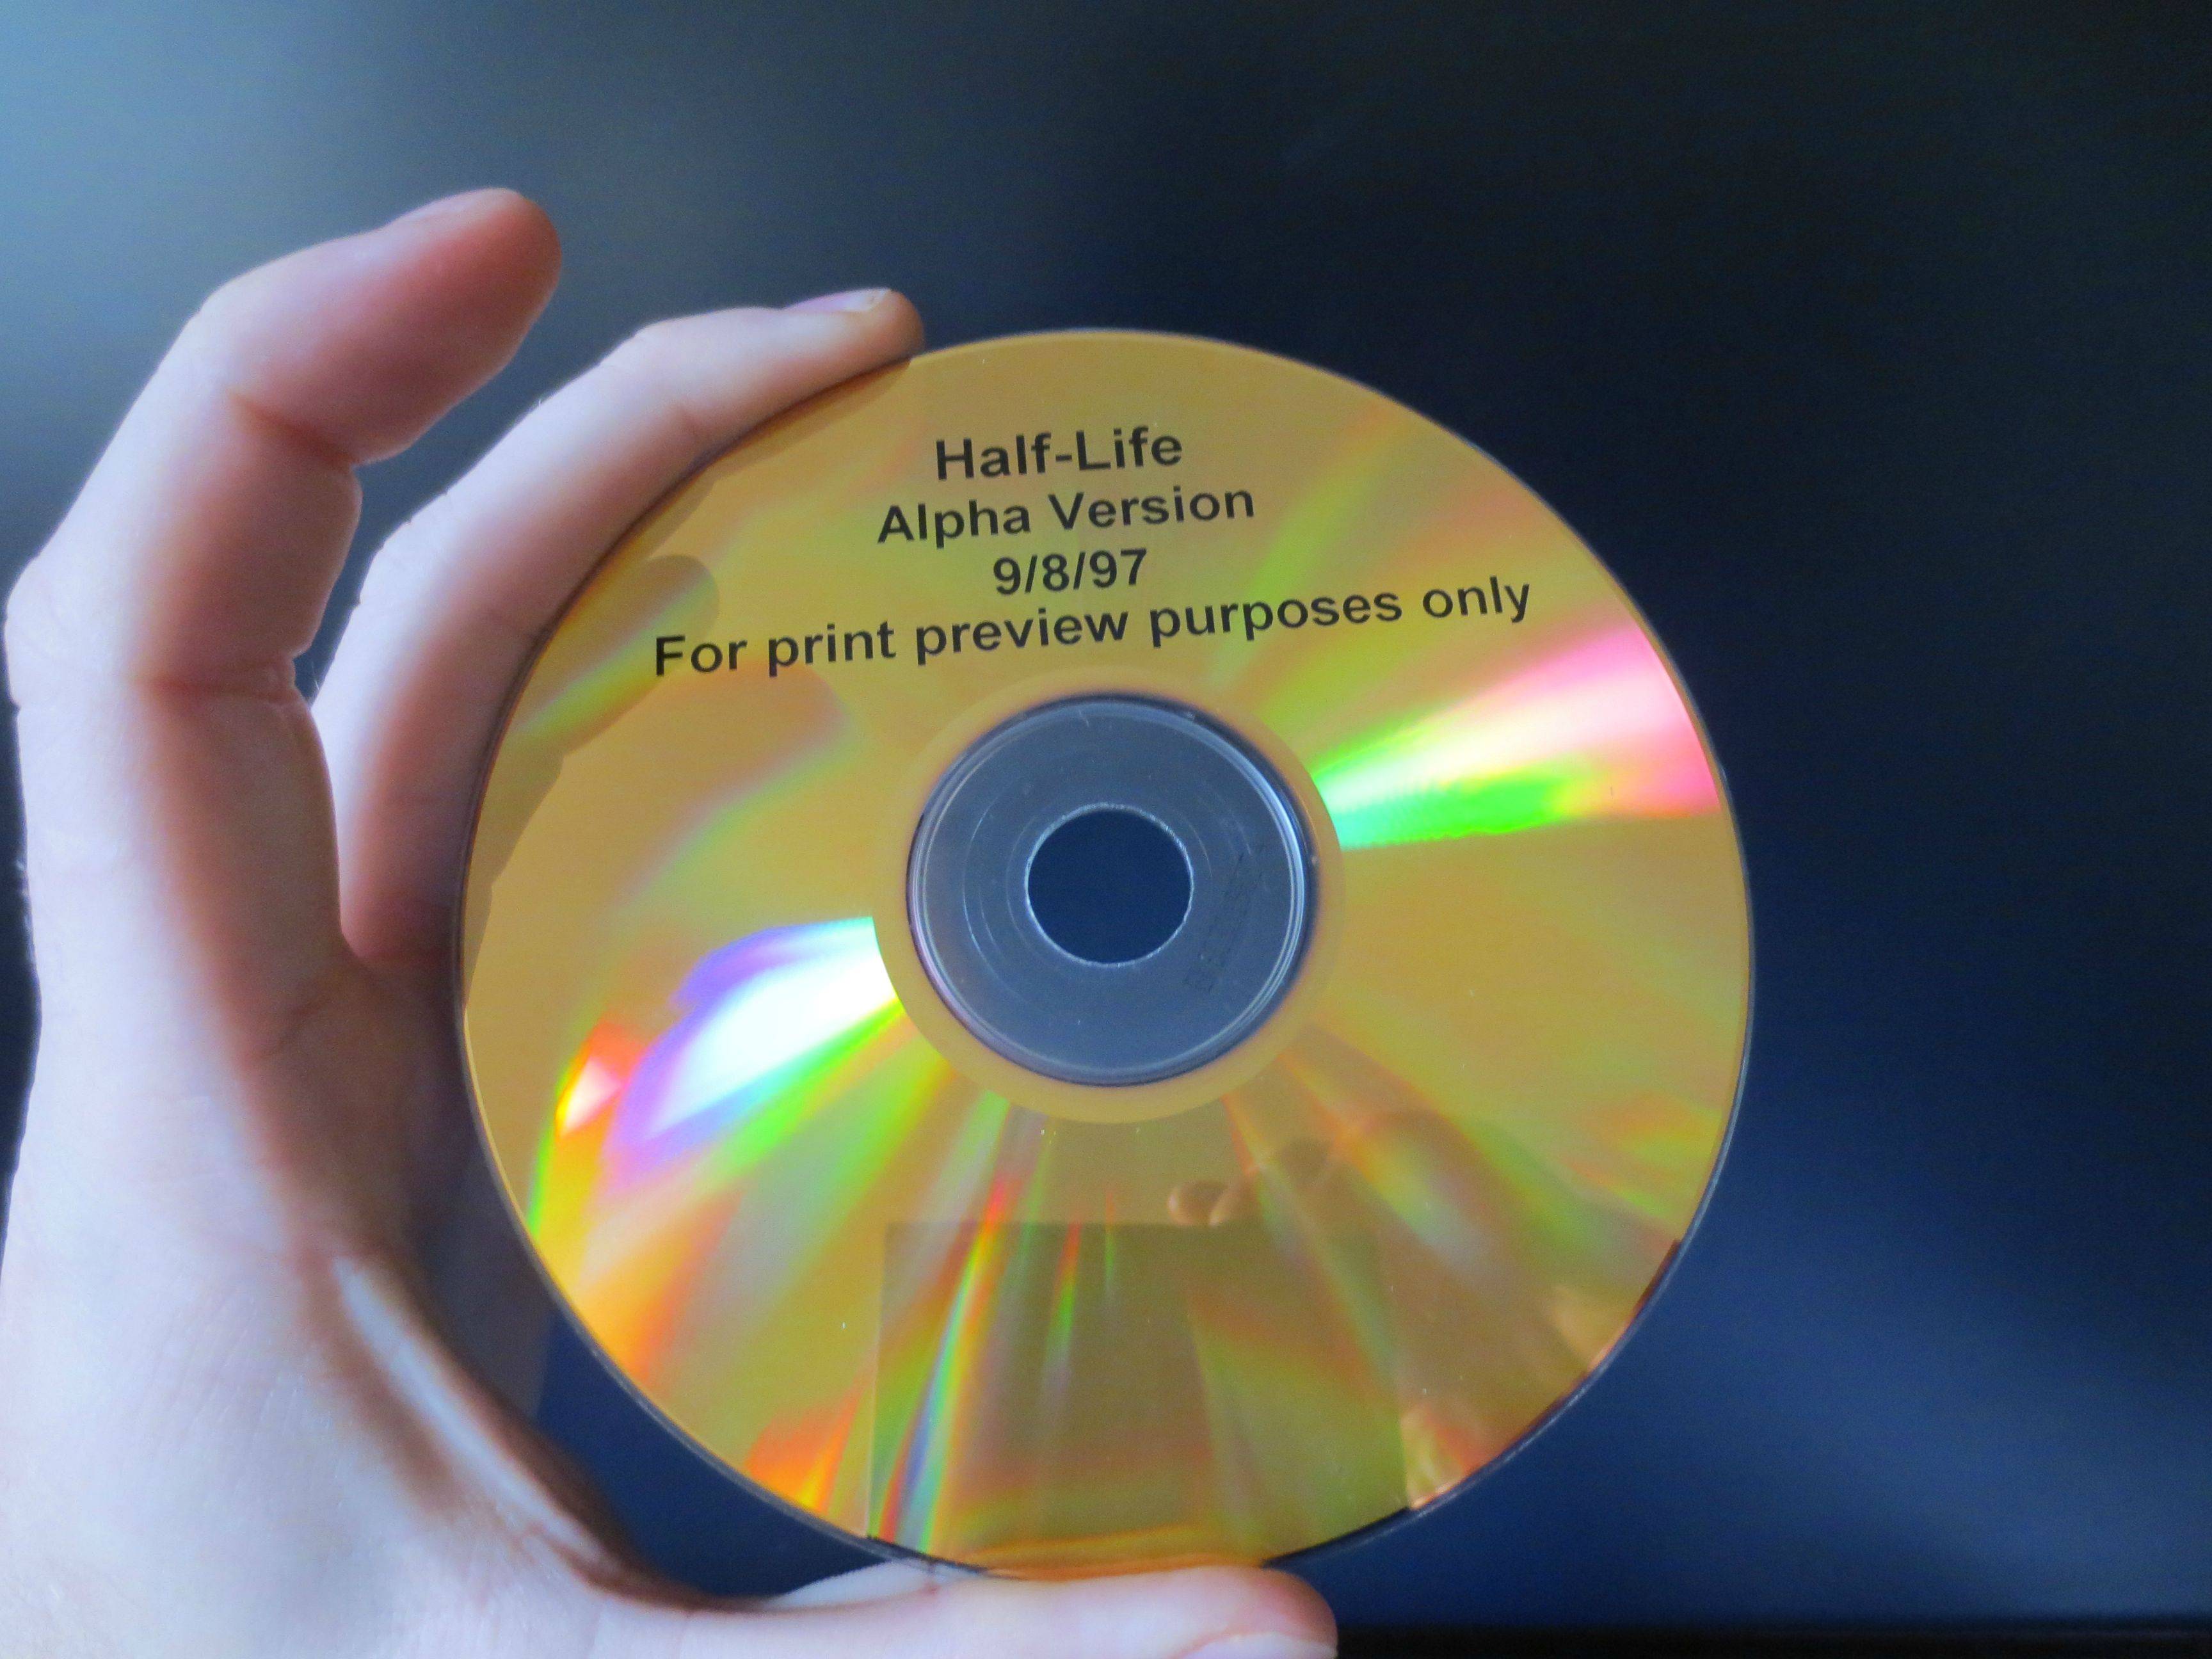 Please type in the cd key displayed on the half life cd case фото 70